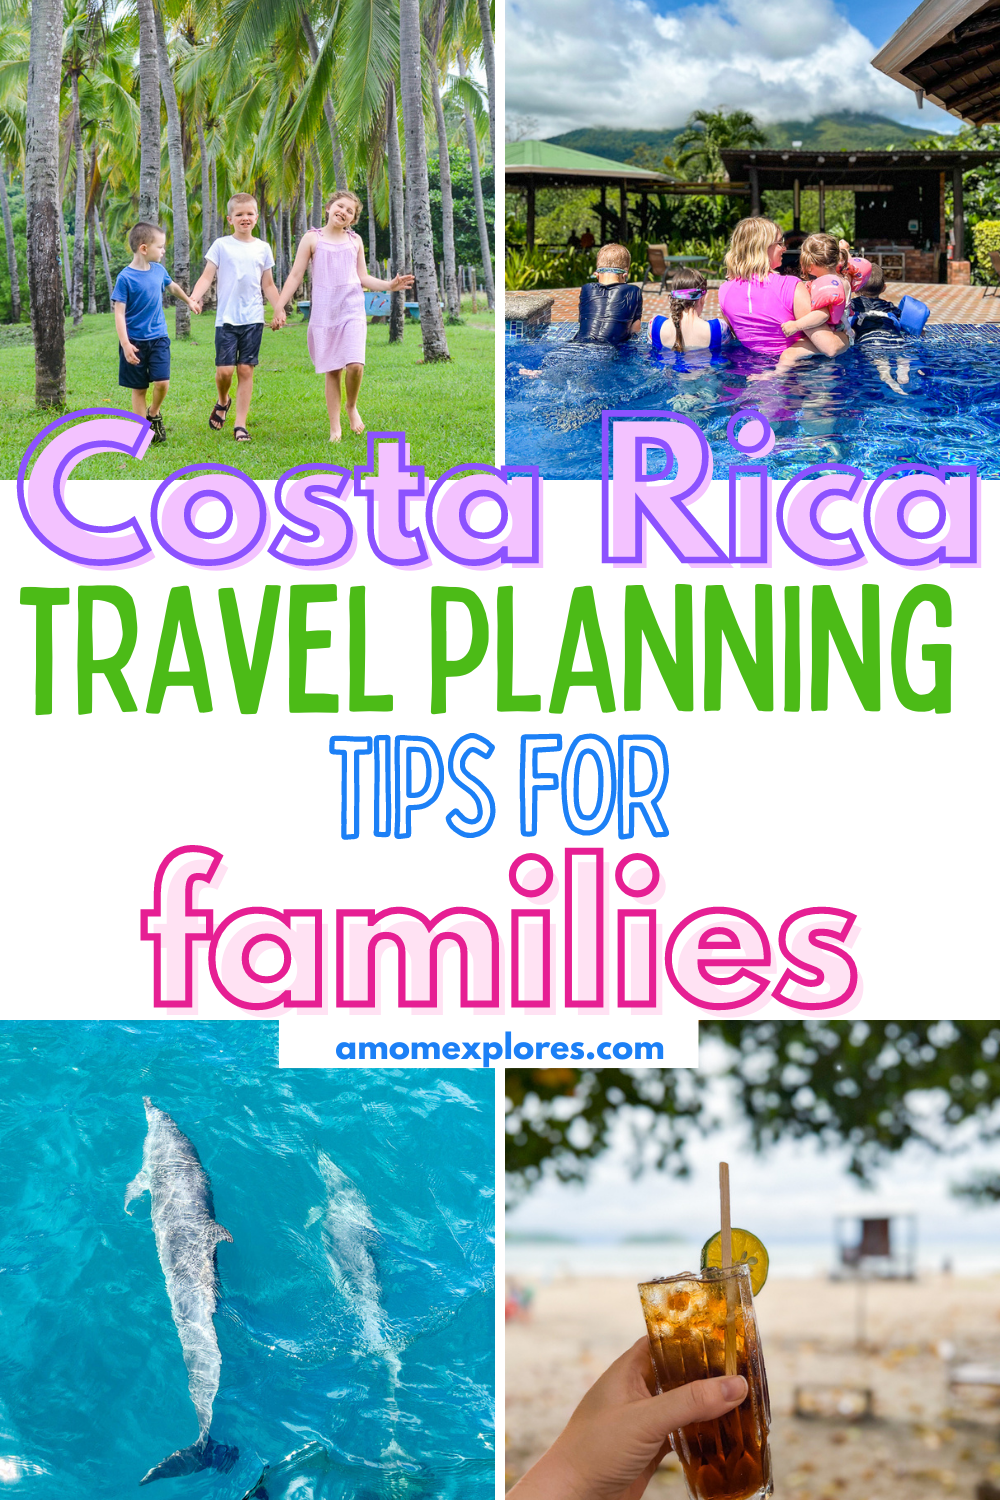 Costa Rica travel planning tips for families.png